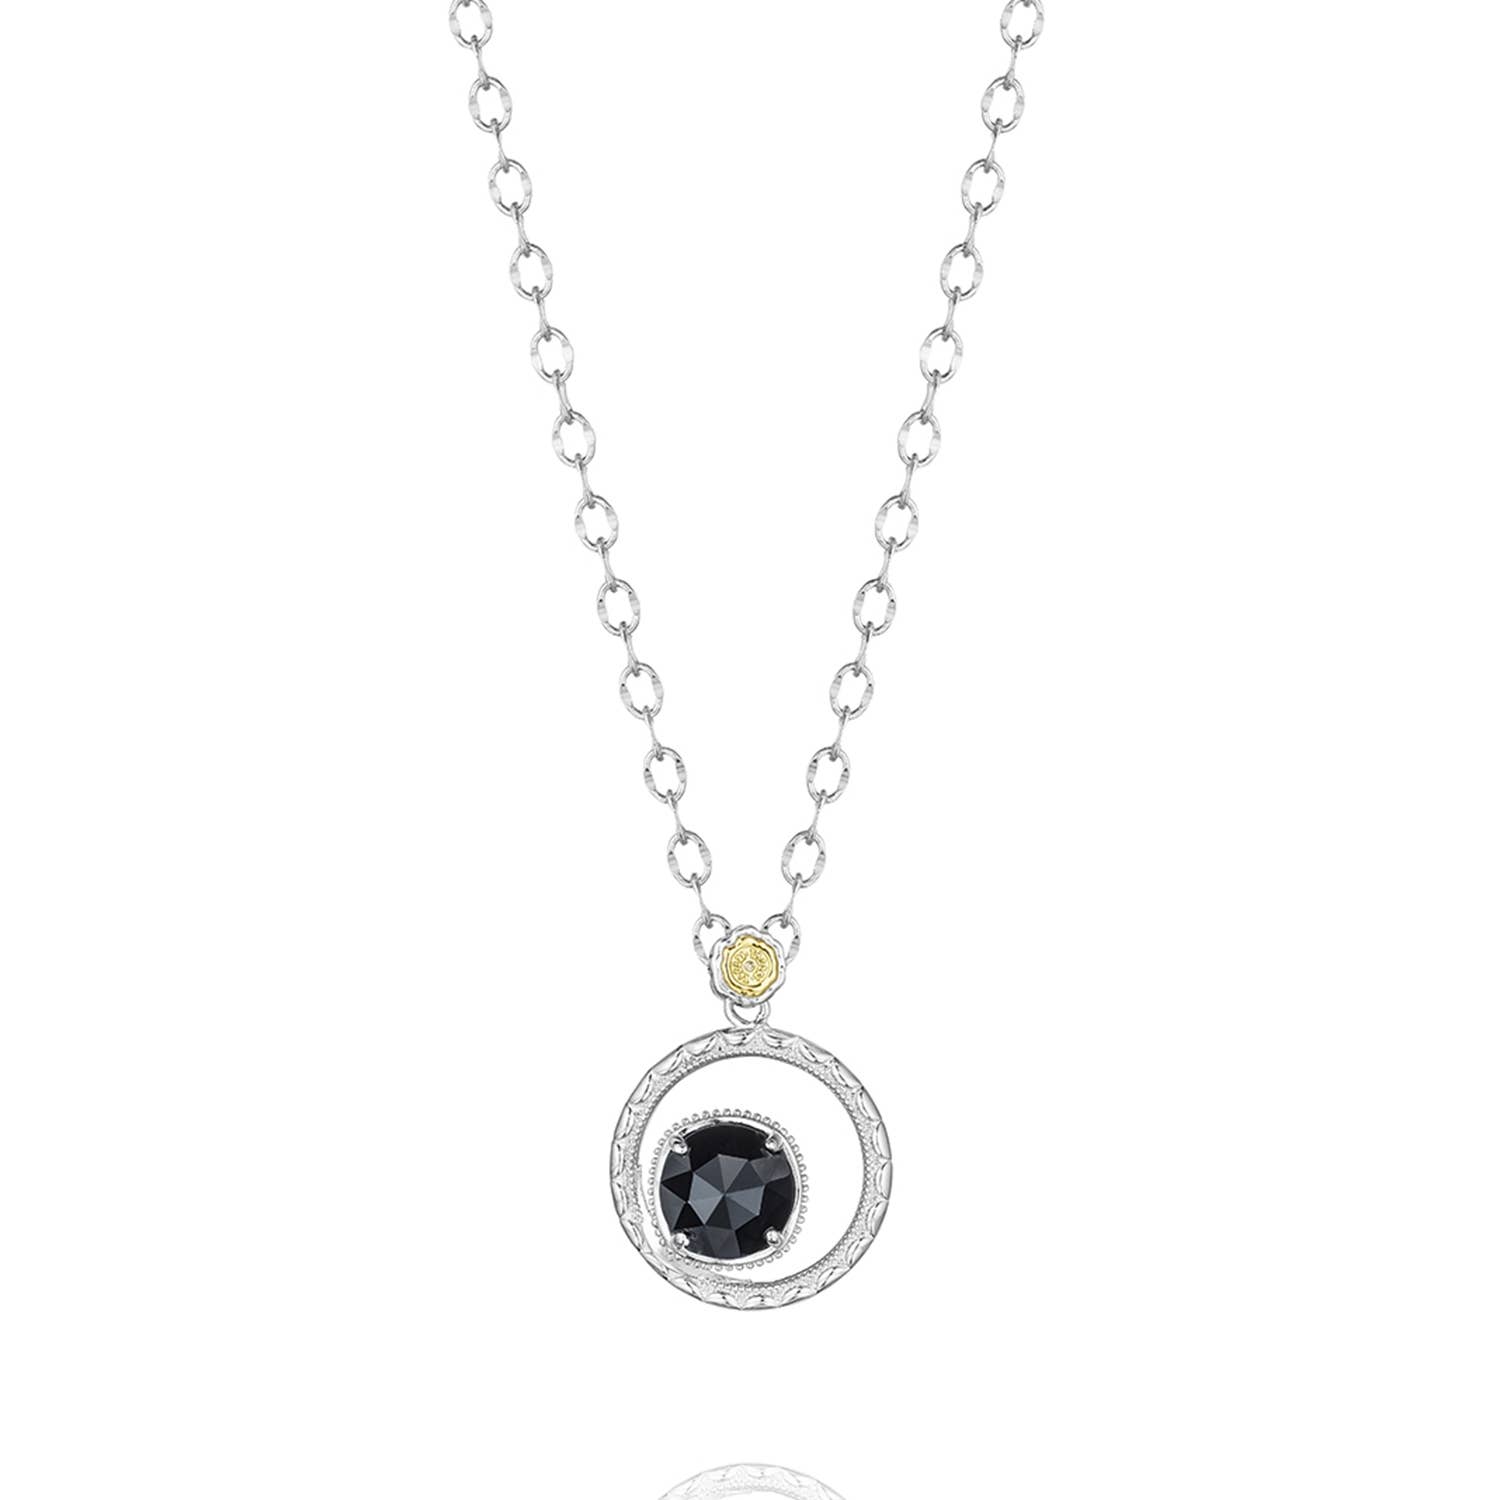 Silver Bloom Necklace featuring Black Onyx